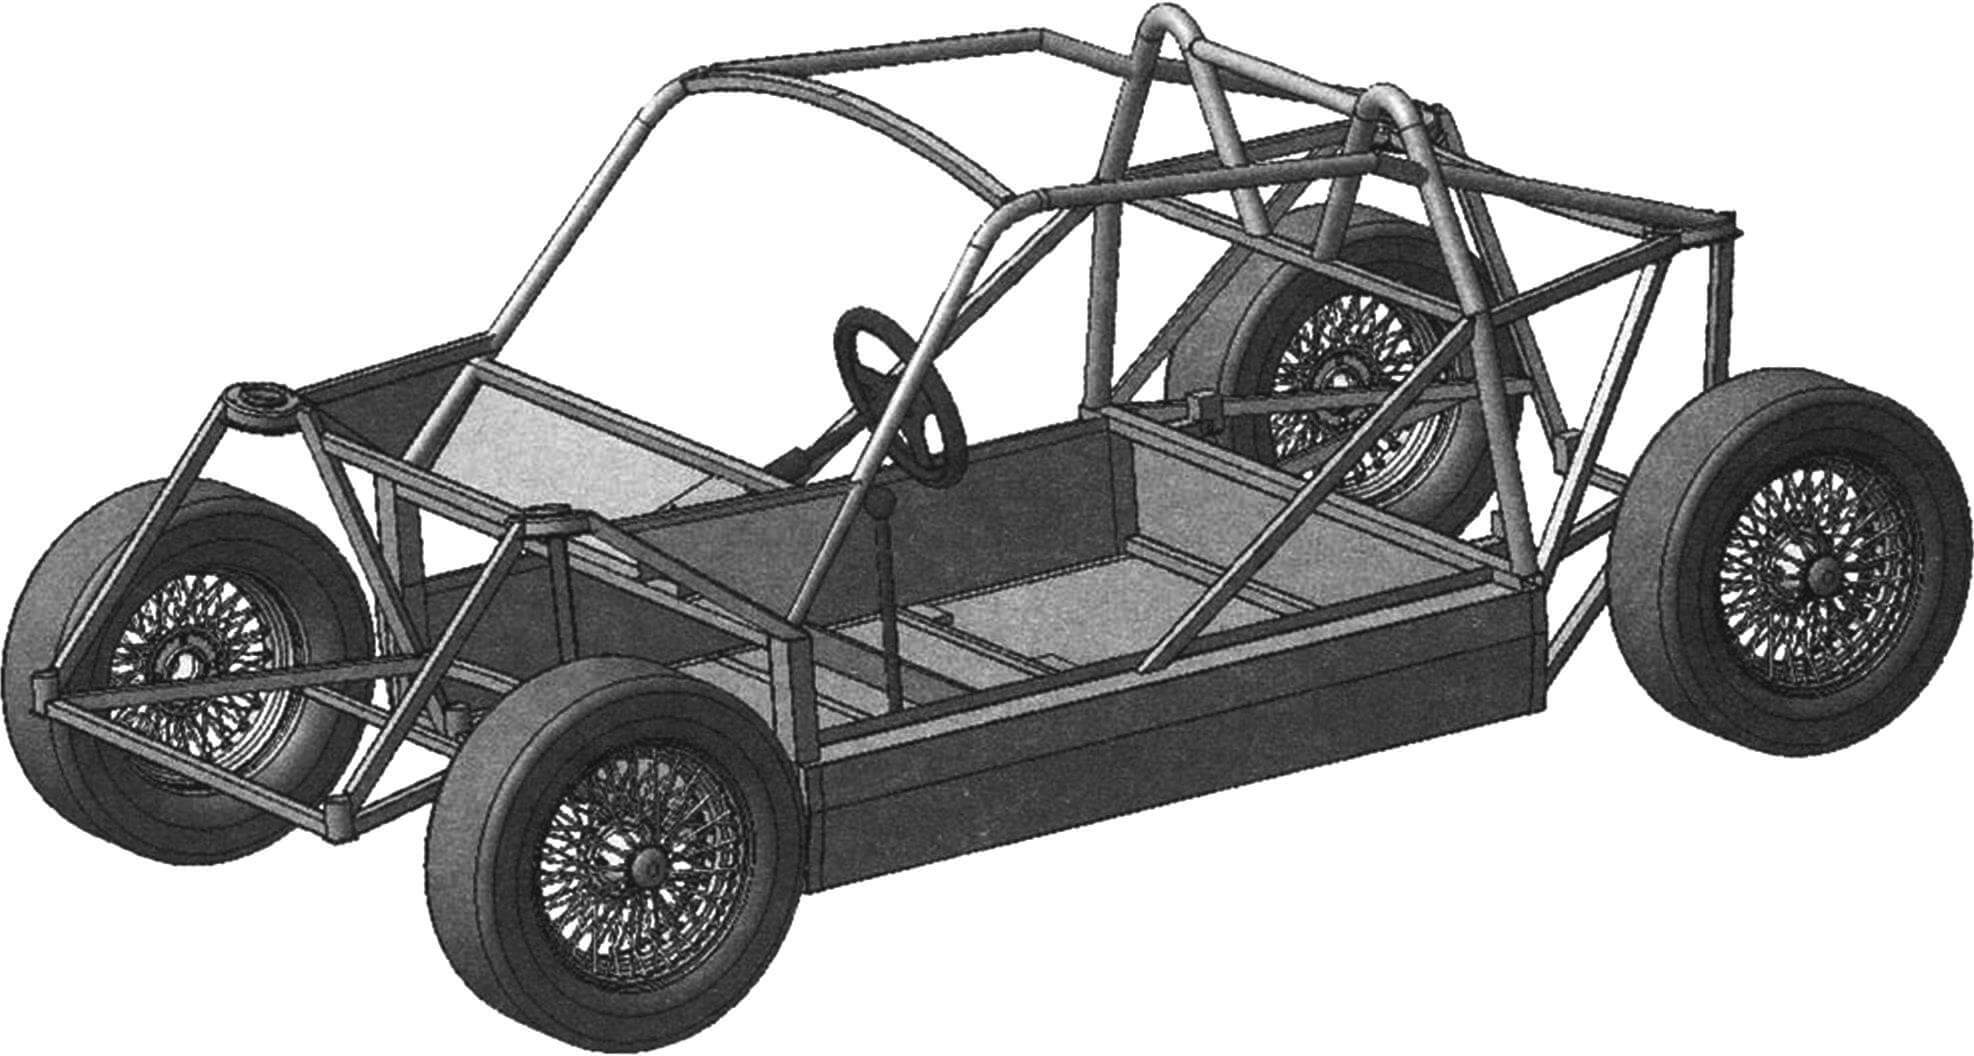 Computer model of the chassis